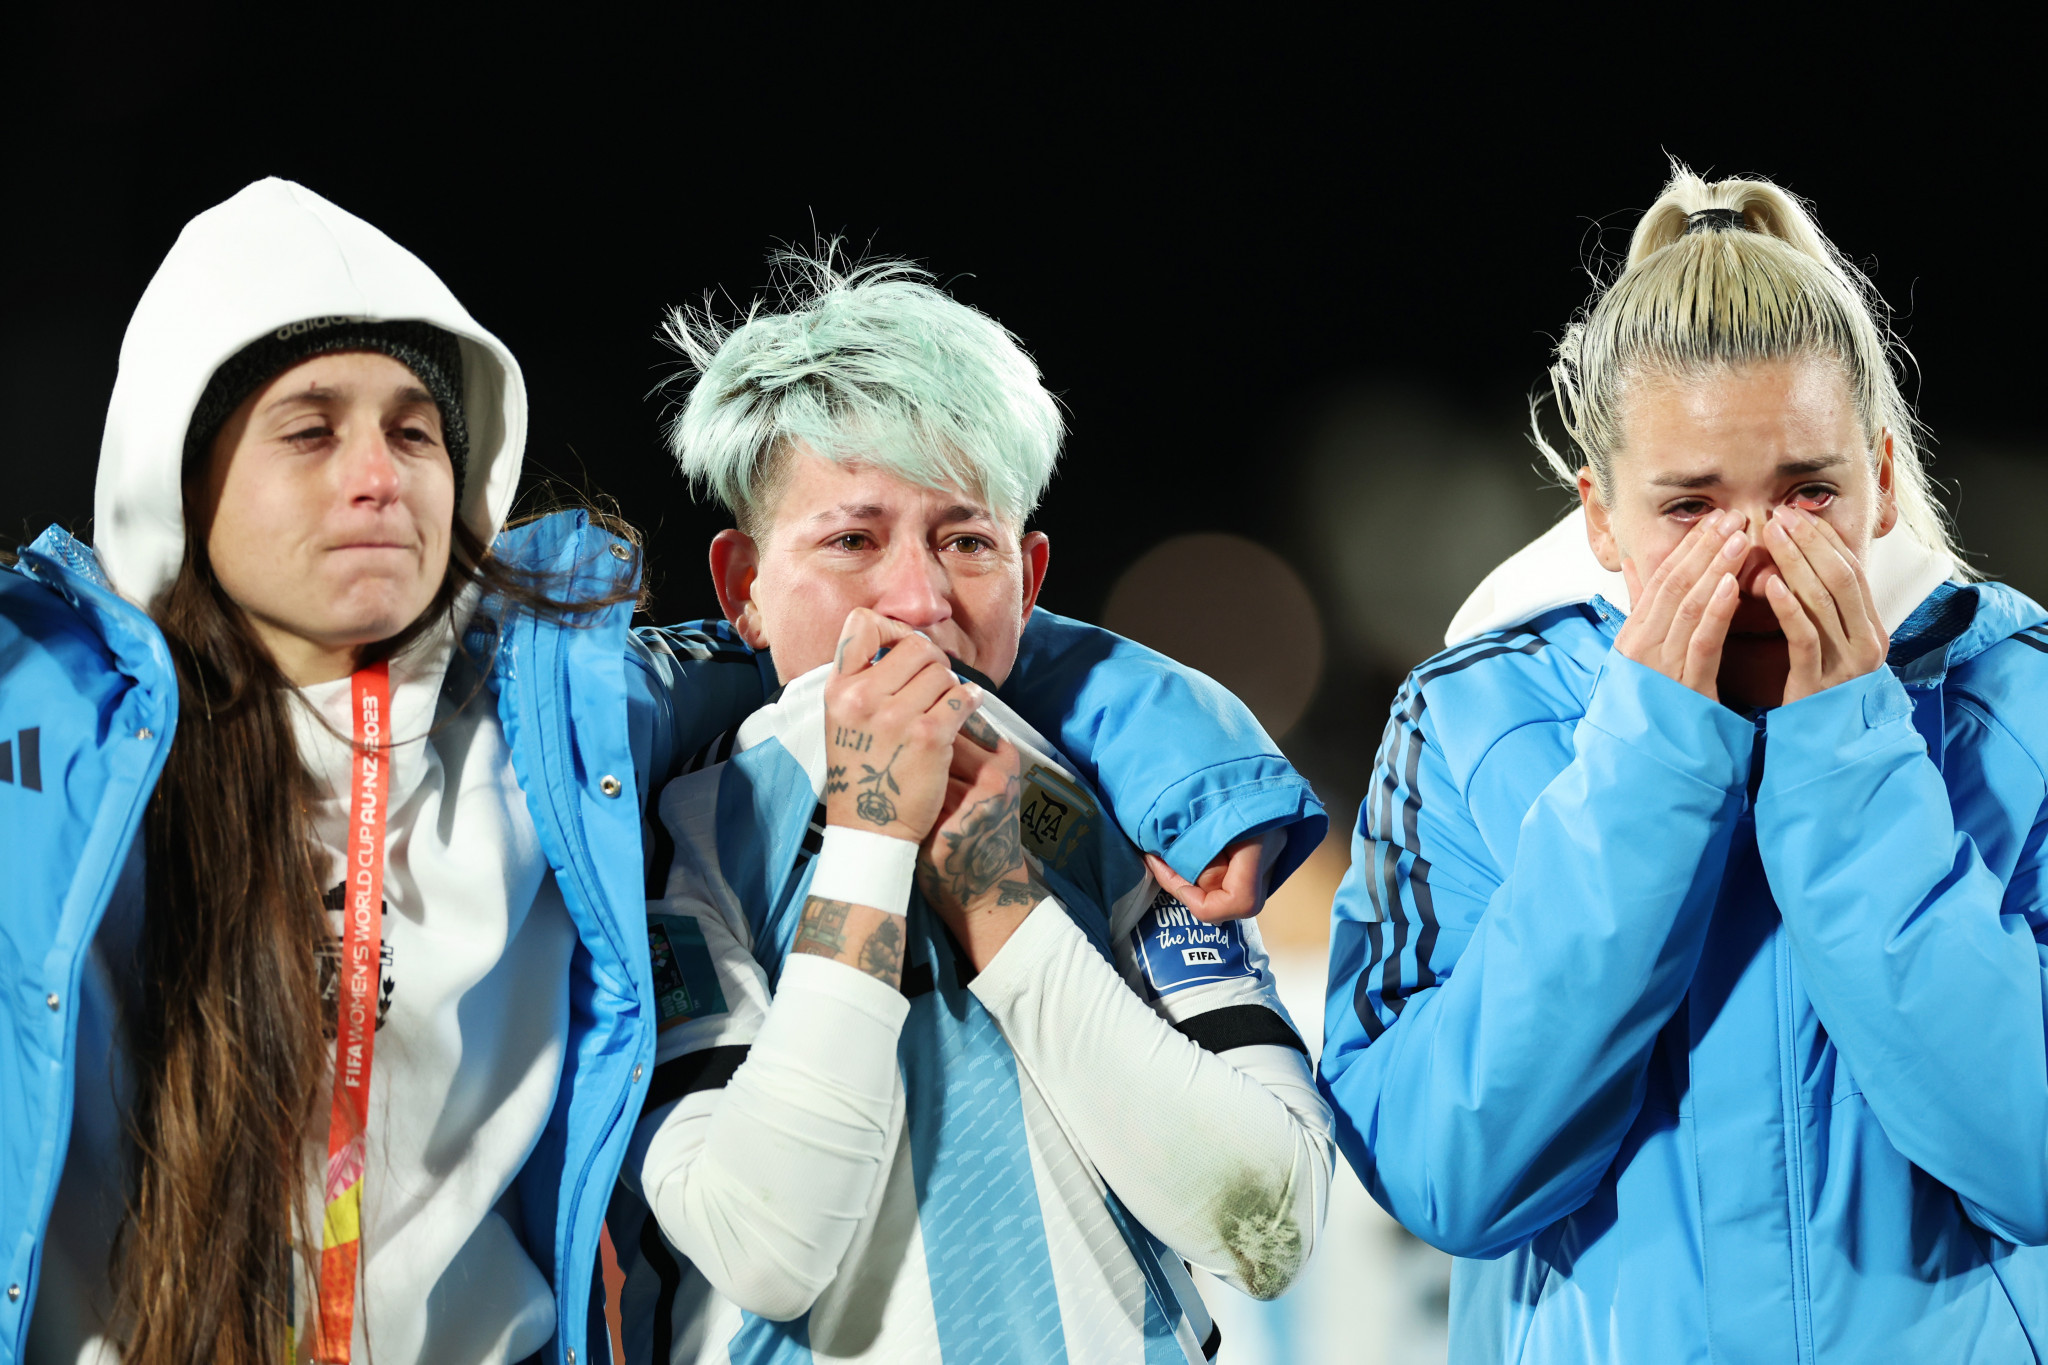 The tears flow for members of the Argentina squad following their exit at the group stage of the tournament ©Getty Images